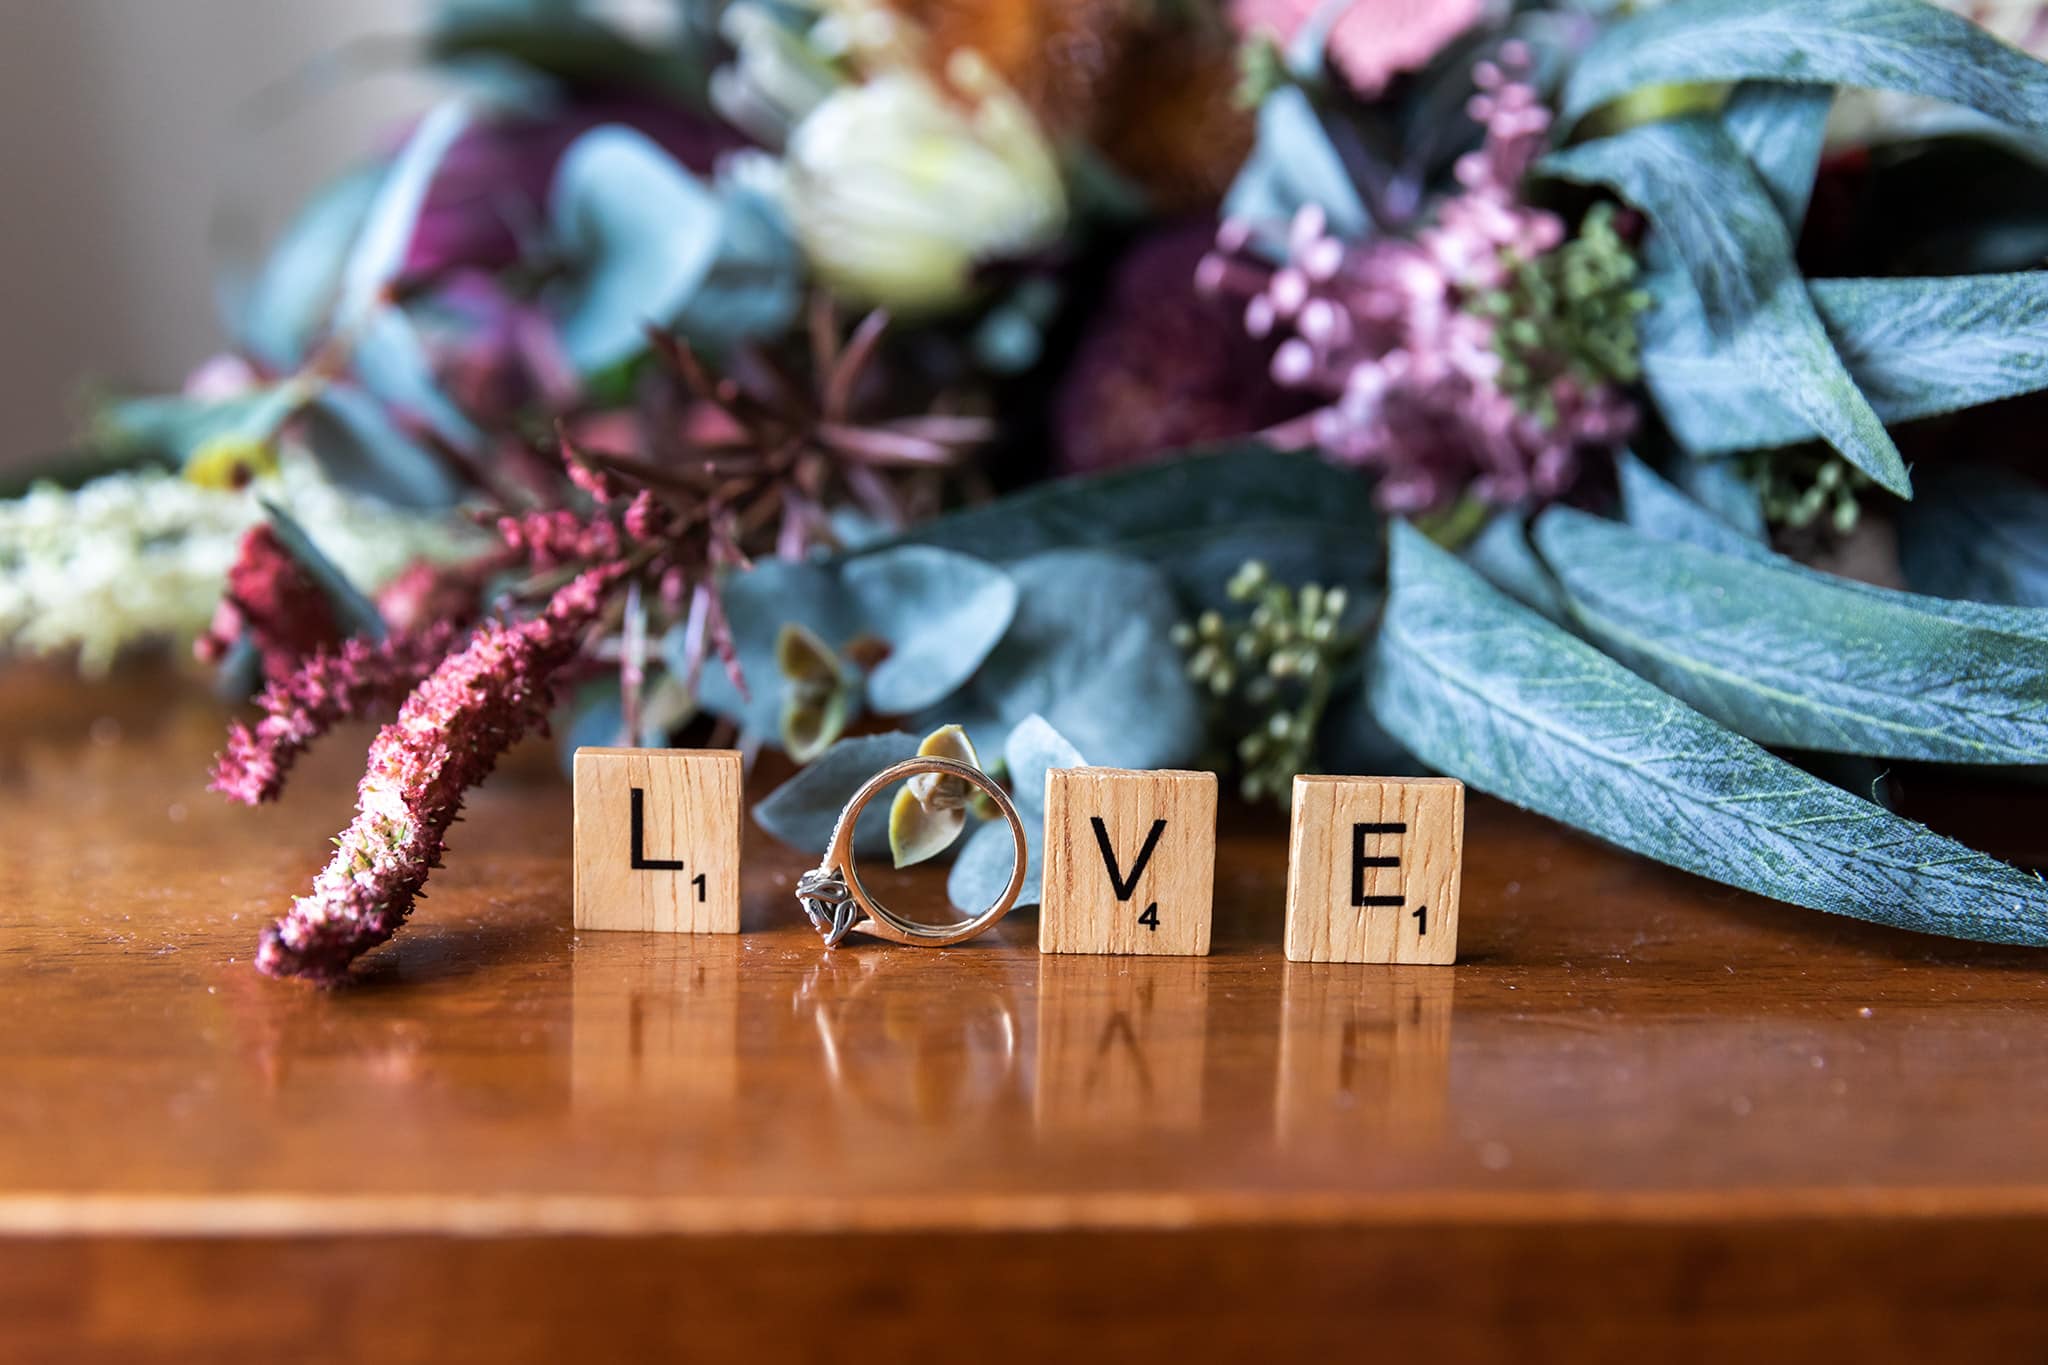 LOVE letters for bridal preparations photo by Bec Pattinson Photography